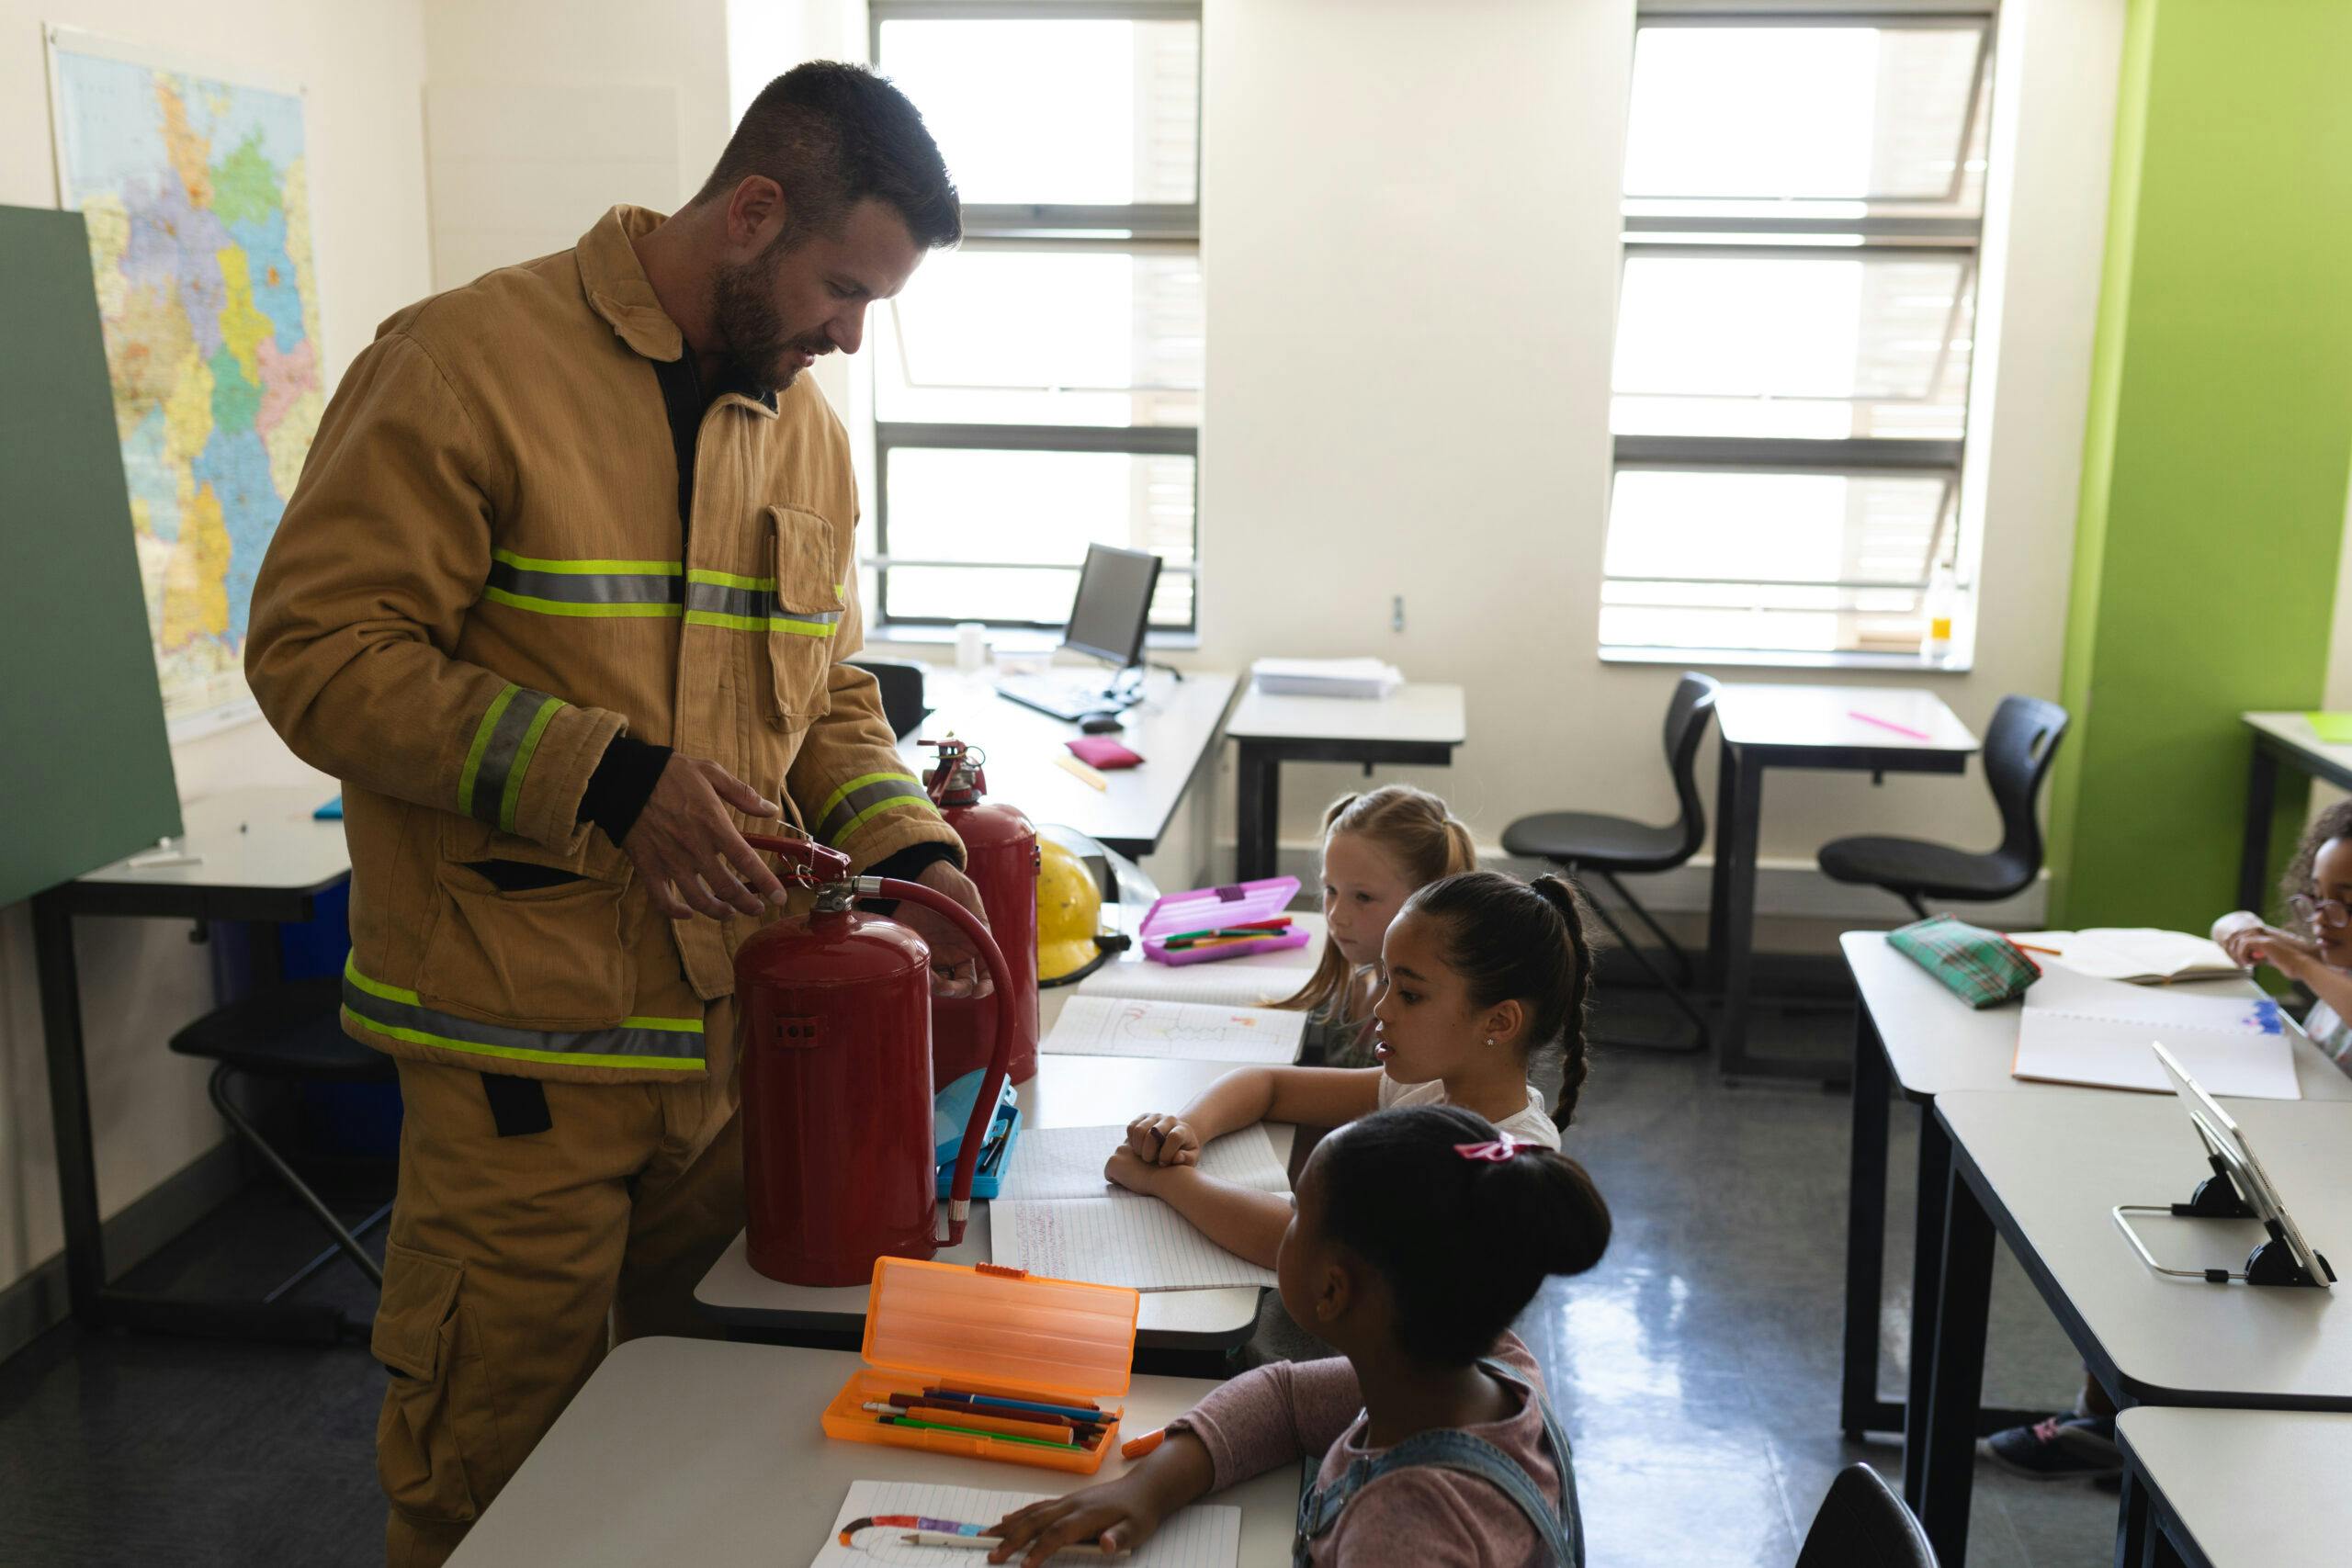 Side view of male Caucasian firefighter teaching schoolkids about fire safety, showing extinguisher in classroom of elementary school